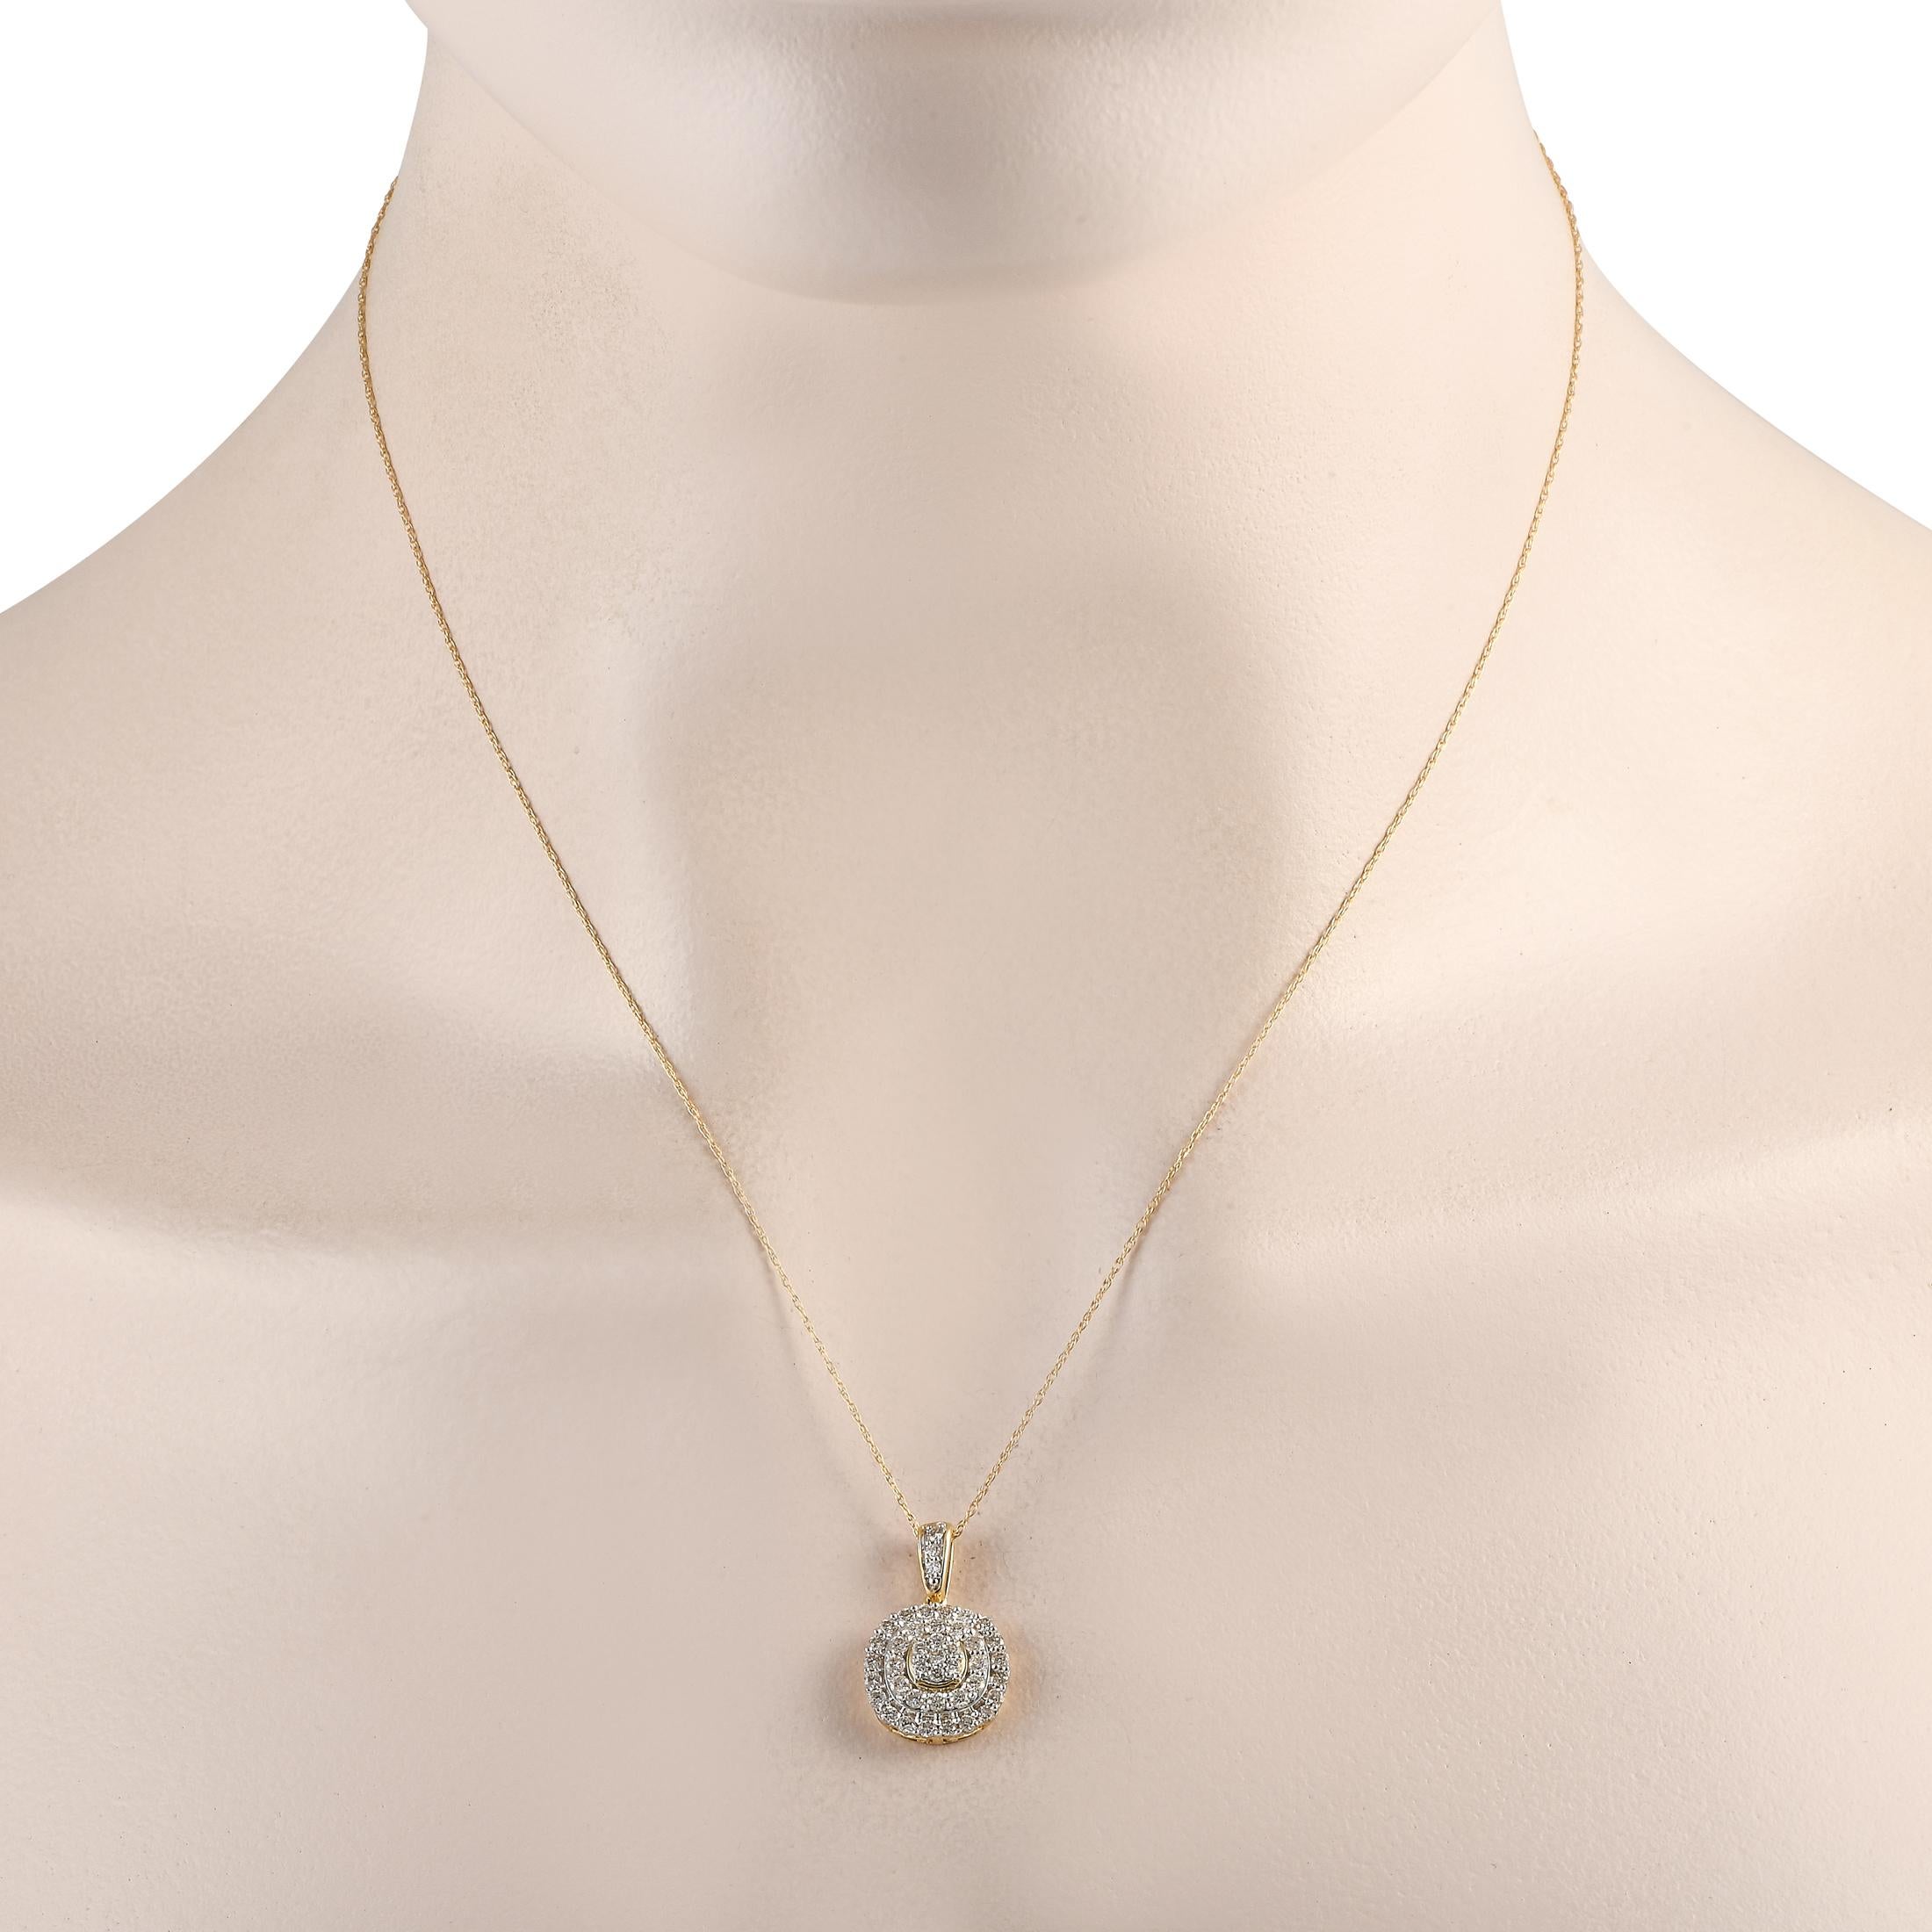 This exquisite necklace is poised to put the perfect finishing touch on any ensemble. On this pieces pendant, sparkling Diamonds with a total weight of 0.75 carats allow it to effortlessly radiate light. The pendant is crafted from 14K Yellow Gold